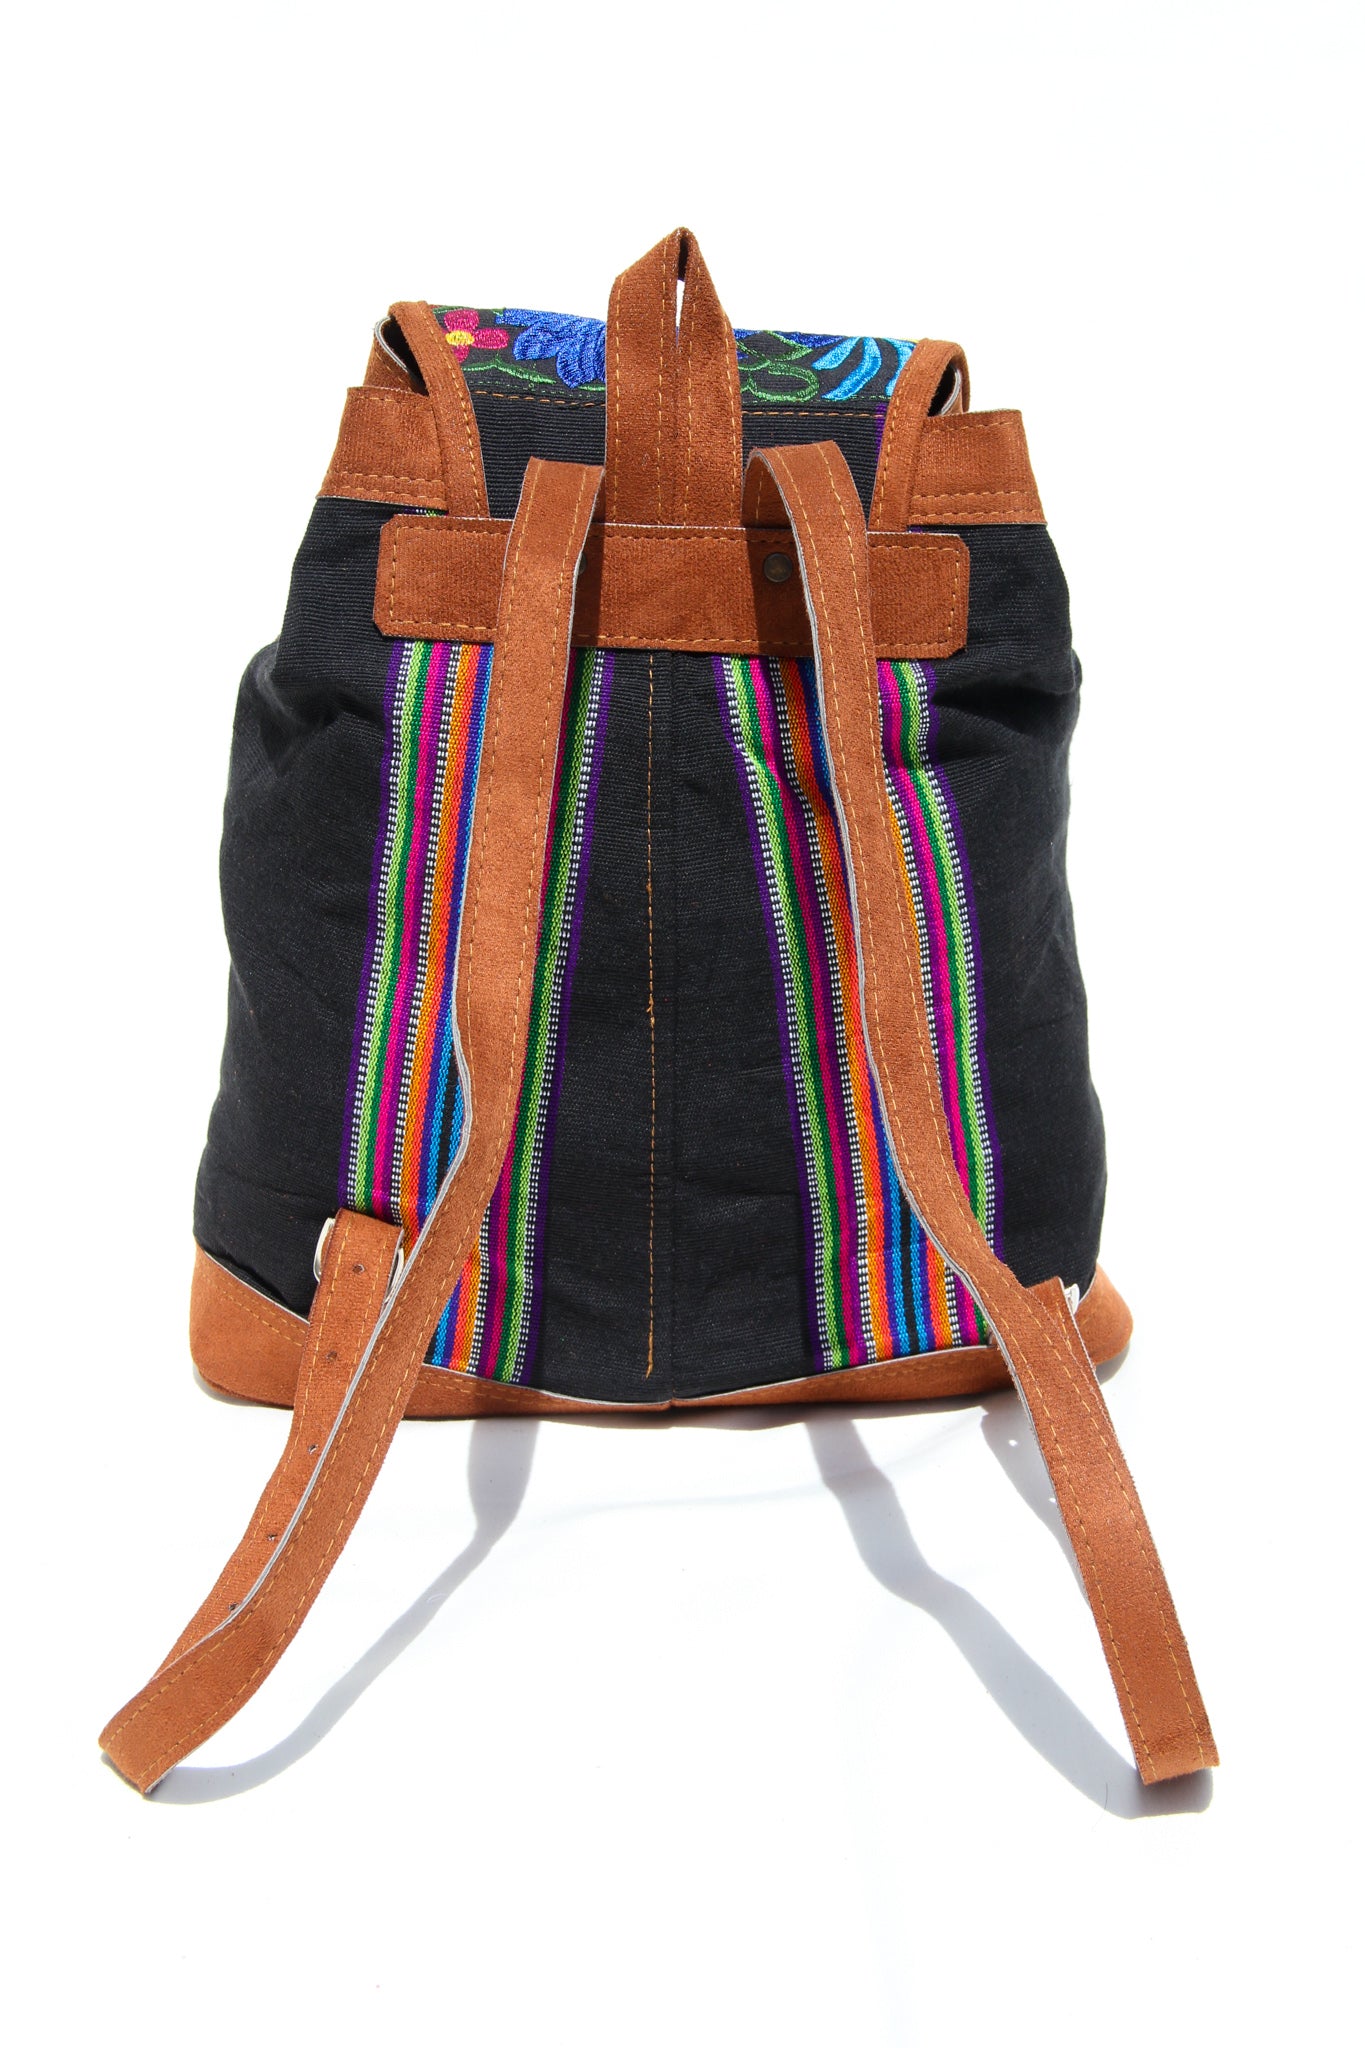 colorful huipil floral embroidery backpack with black woven fabric and faux suede contrast with adjustable straps and front buckle closure with front zipper pocket the prefect travel, hiking or beach bag unique bag great for back to school take this bag on your next destination boho bag and hippie style bag a great standout accessories made in Guatemala